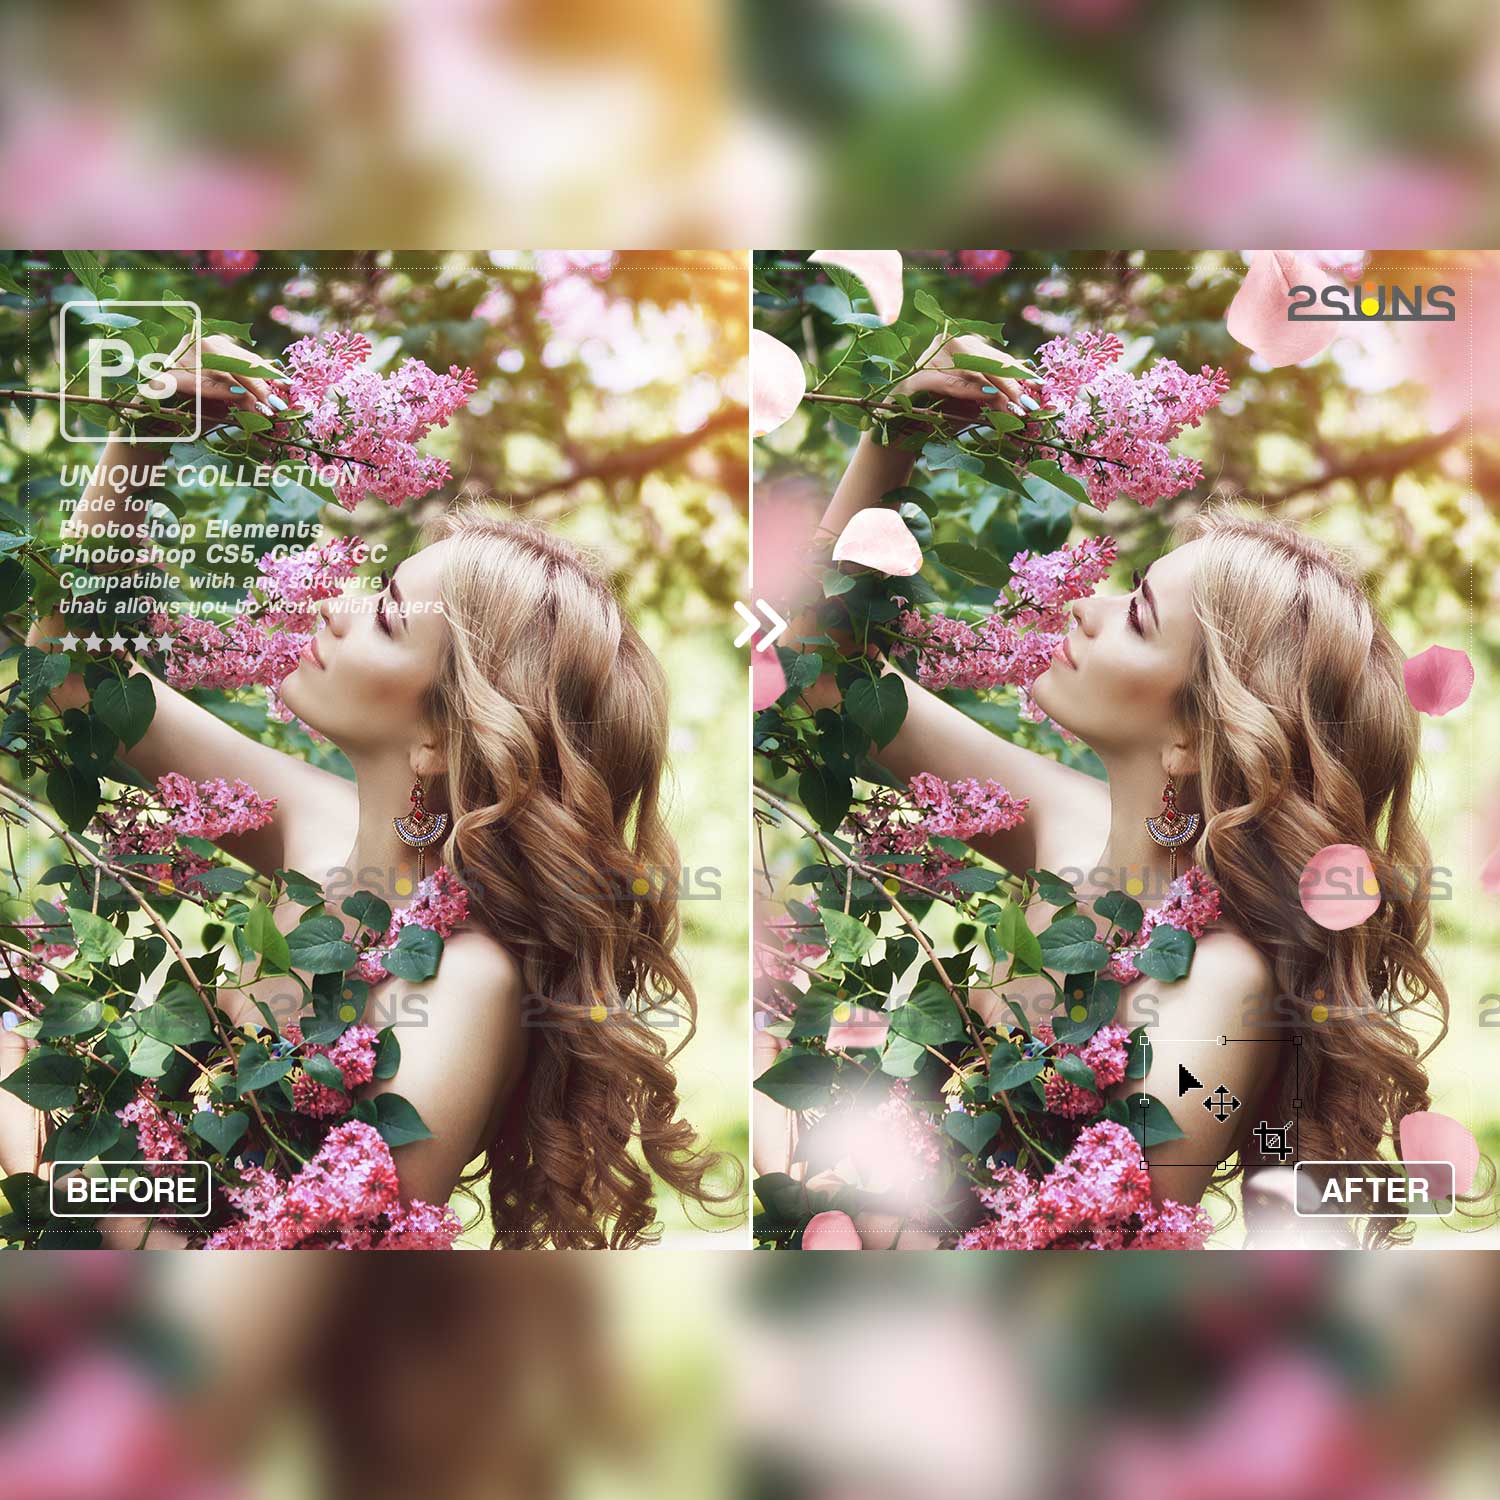 Pink Falling Rose Petals Photo Overlays Girl In The Garden Example.